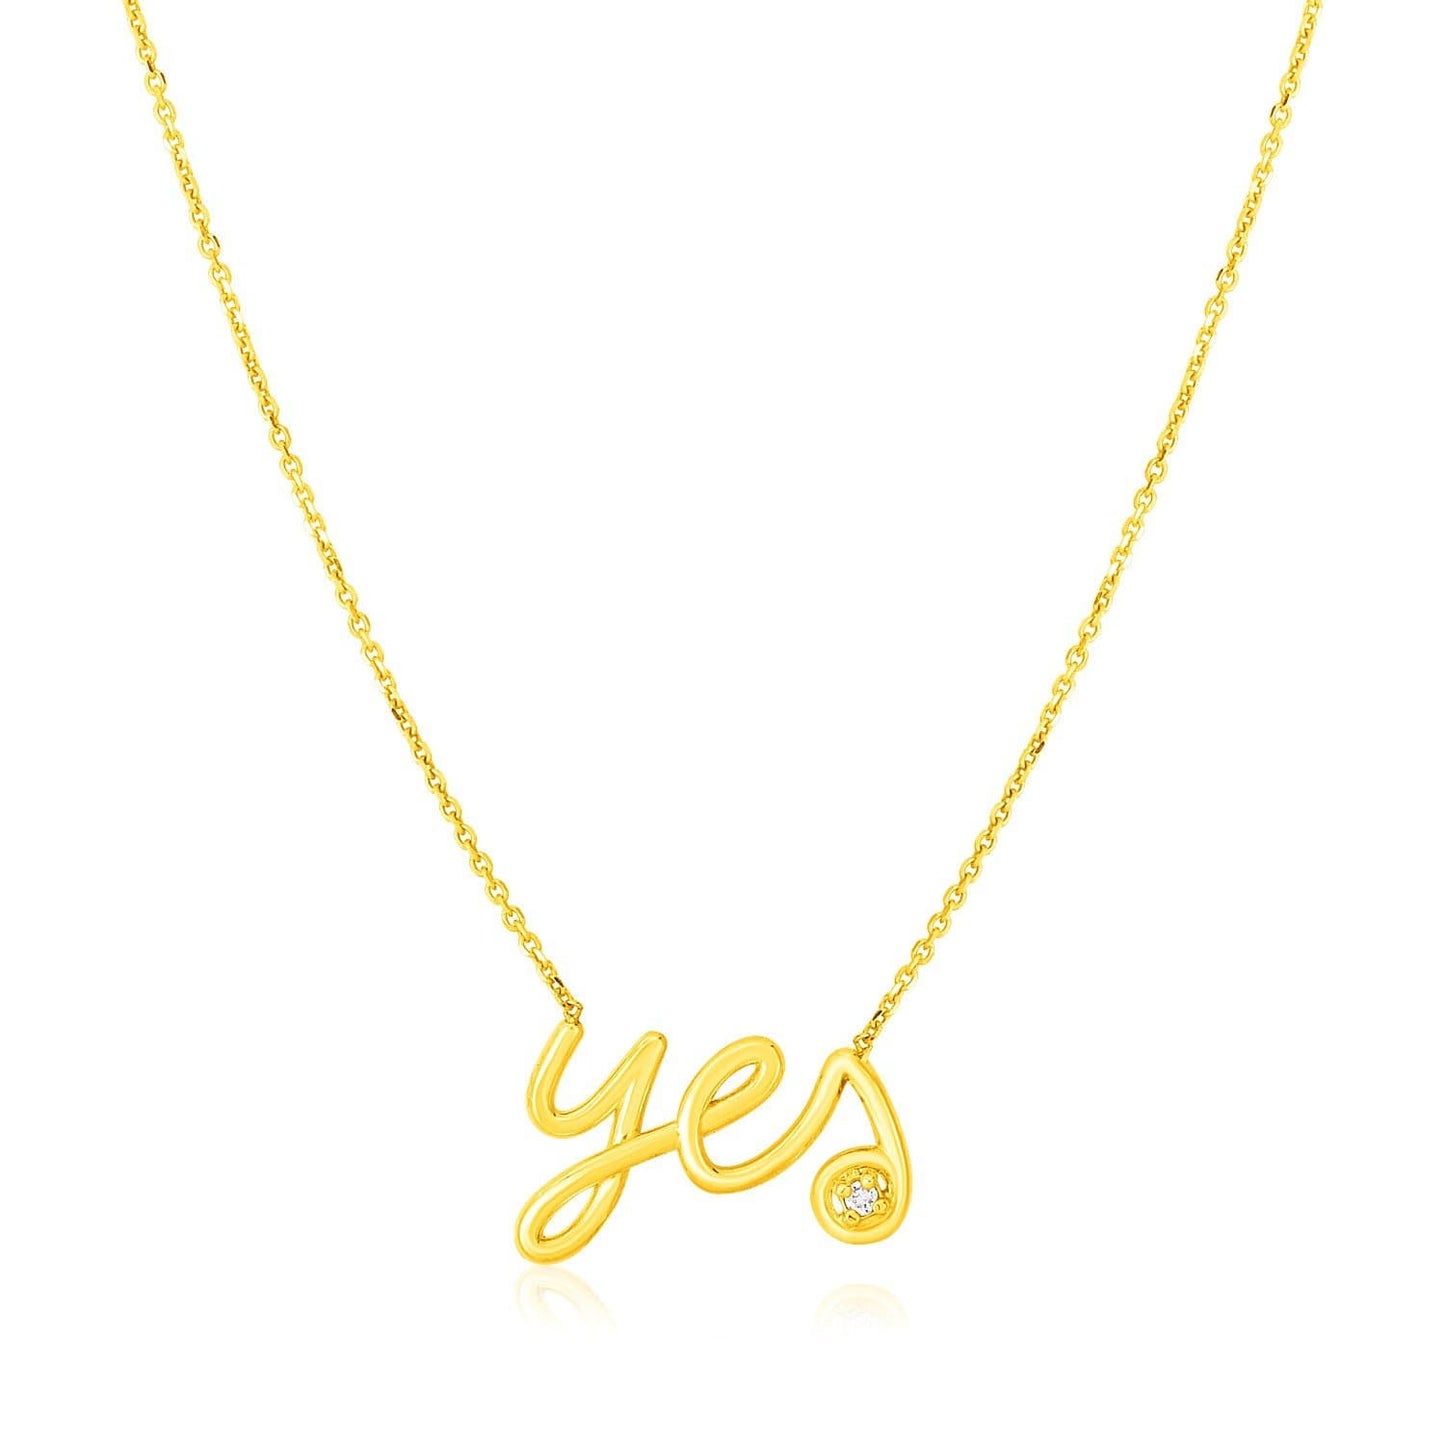 14K Yellow Gold Yes Necklace with Diamond